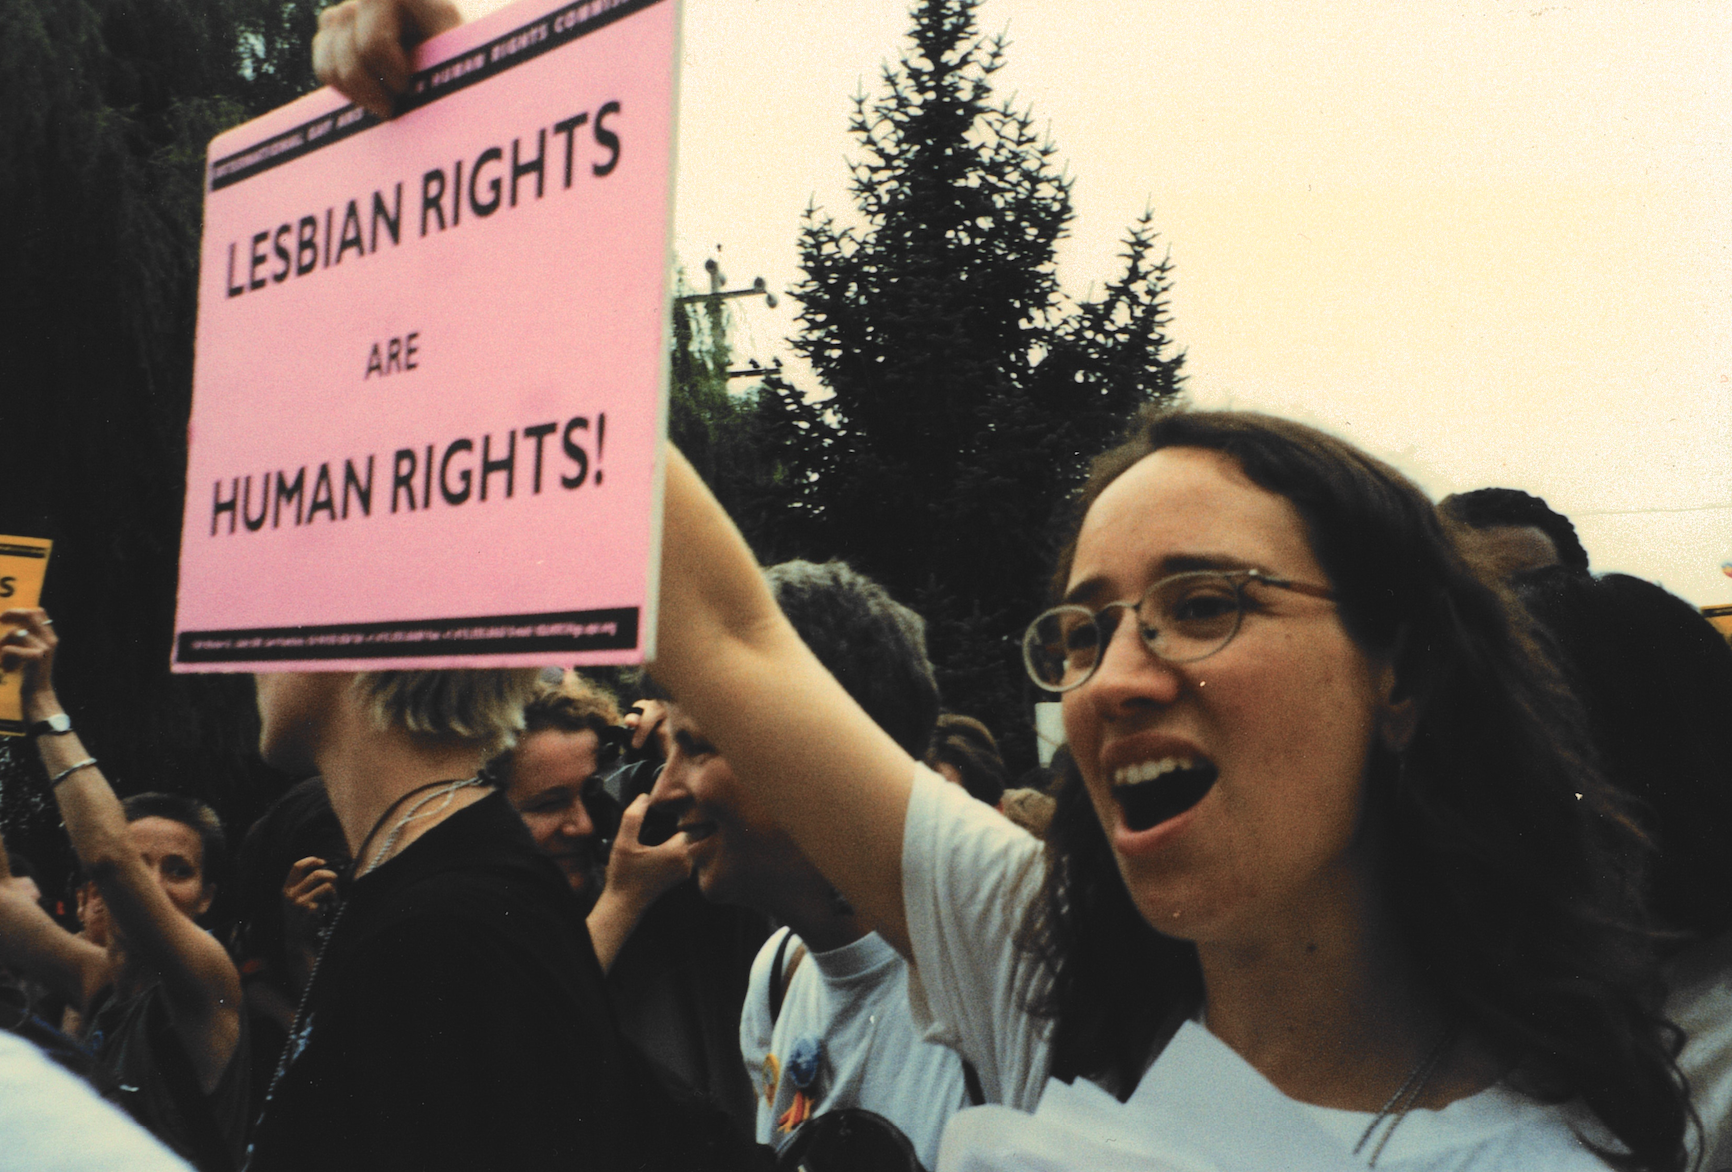 julie dorf holding a sign: Lesbian rights are human rights